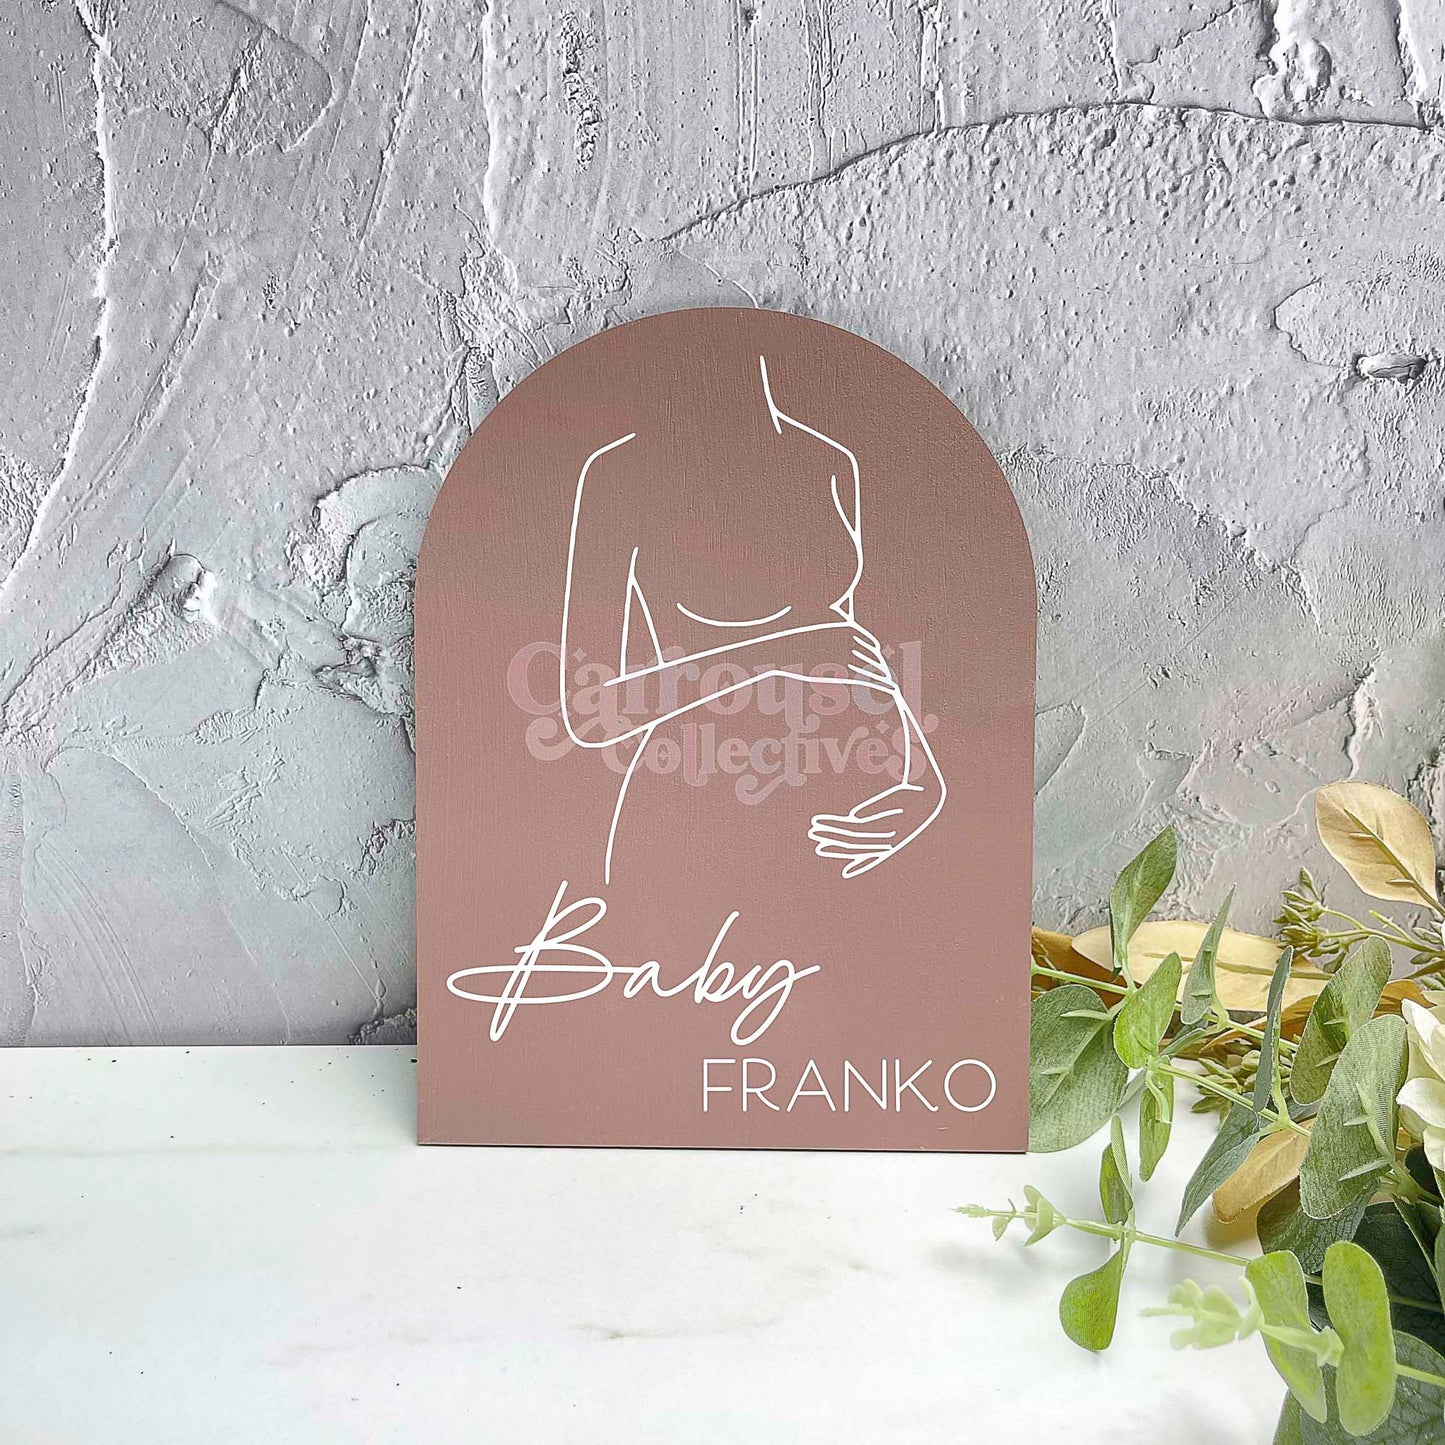 Personalised baby shower acrylic sign, Pregnancy celebration sign